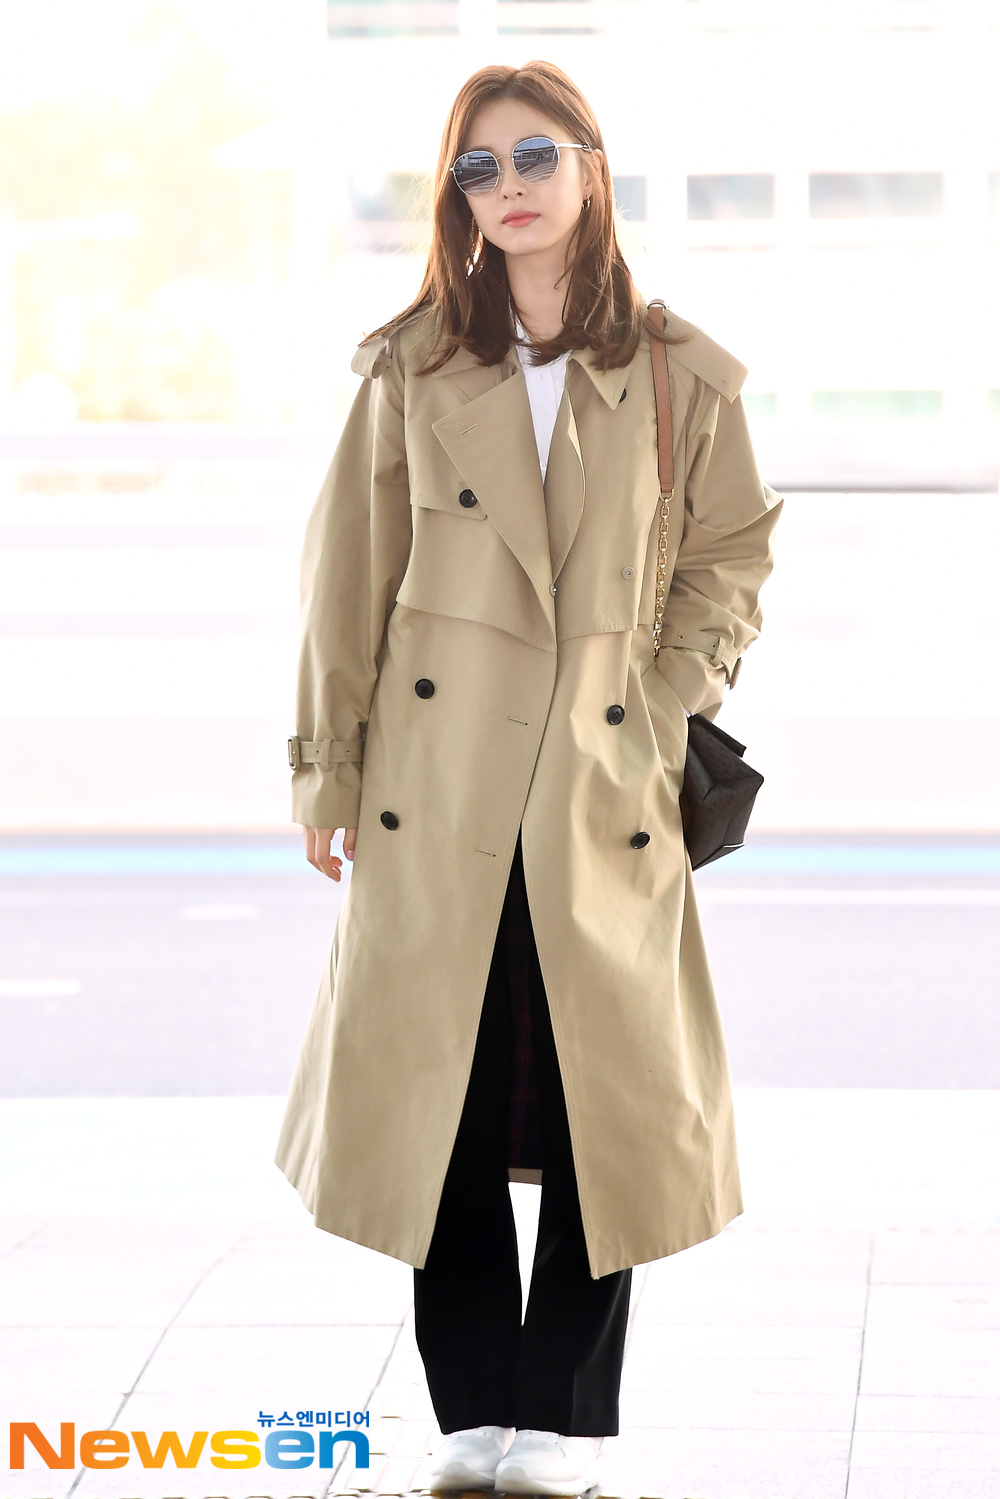 Actor Shin Se-kyung left for Hong Kong on March 29th at the Incheon International Airport in Unseo-dong, Jung-gu, Incheon.Actor Shin Se-kyung is leaving for Hong Kong with an airport fashion.exponential earthquake